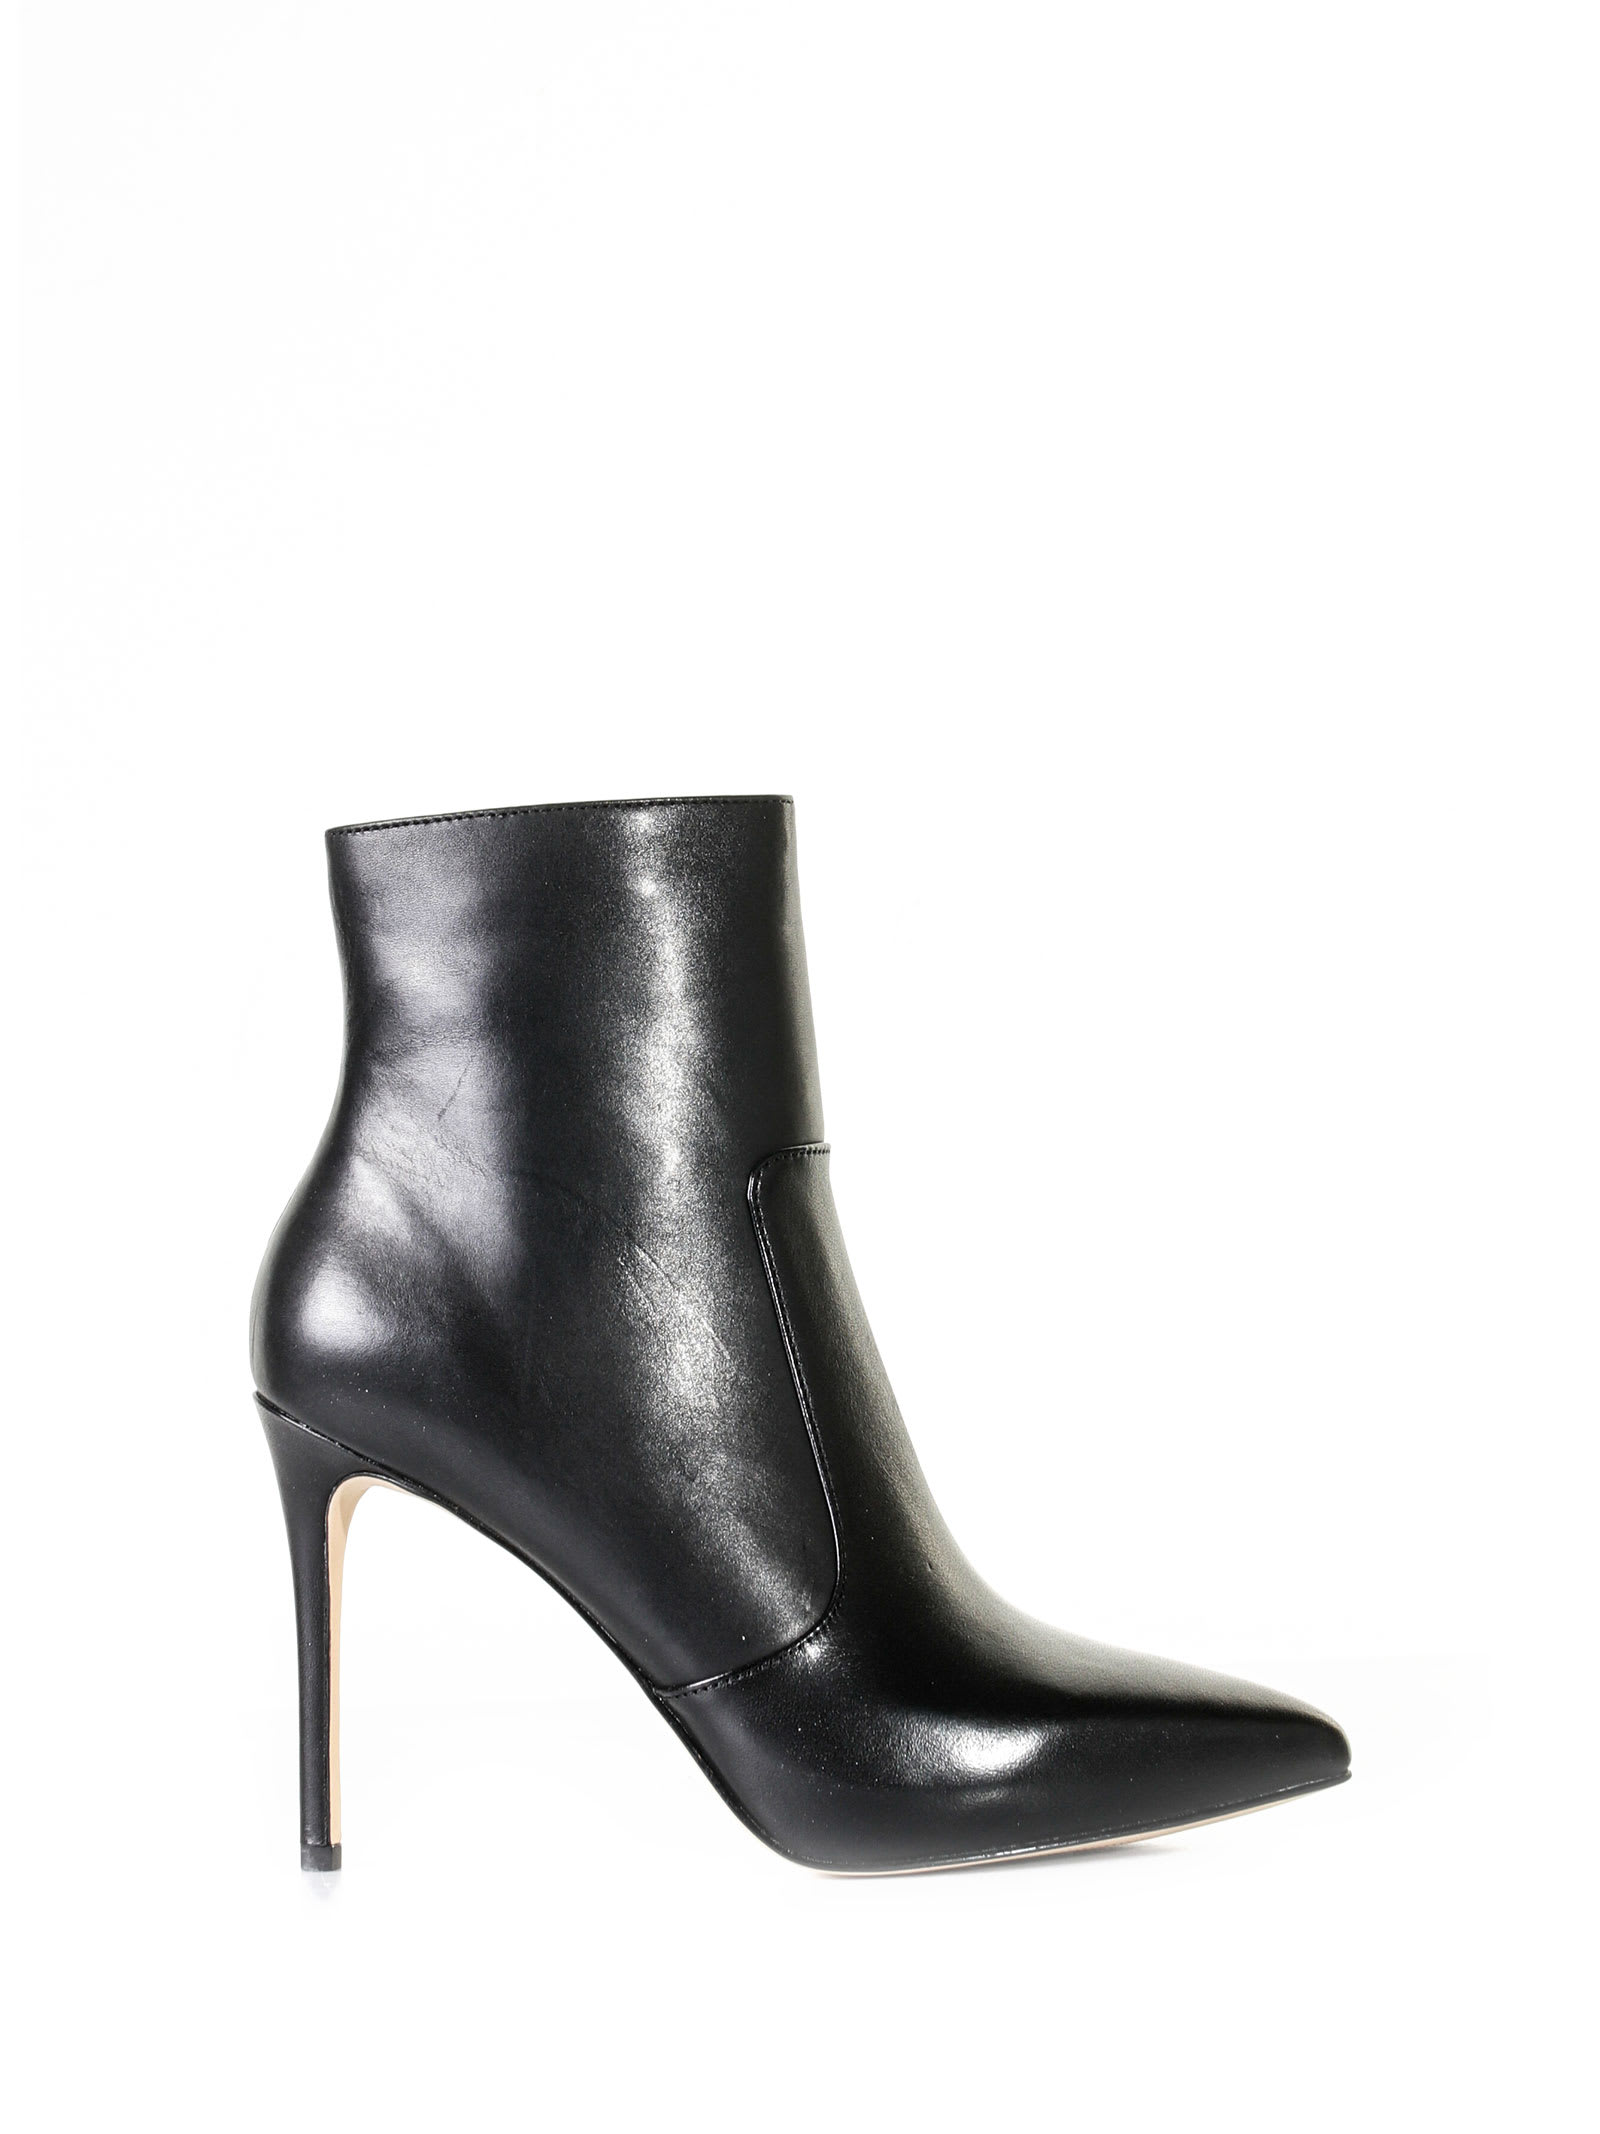 Michael Kors Ankle Boot With Stiletto Heel